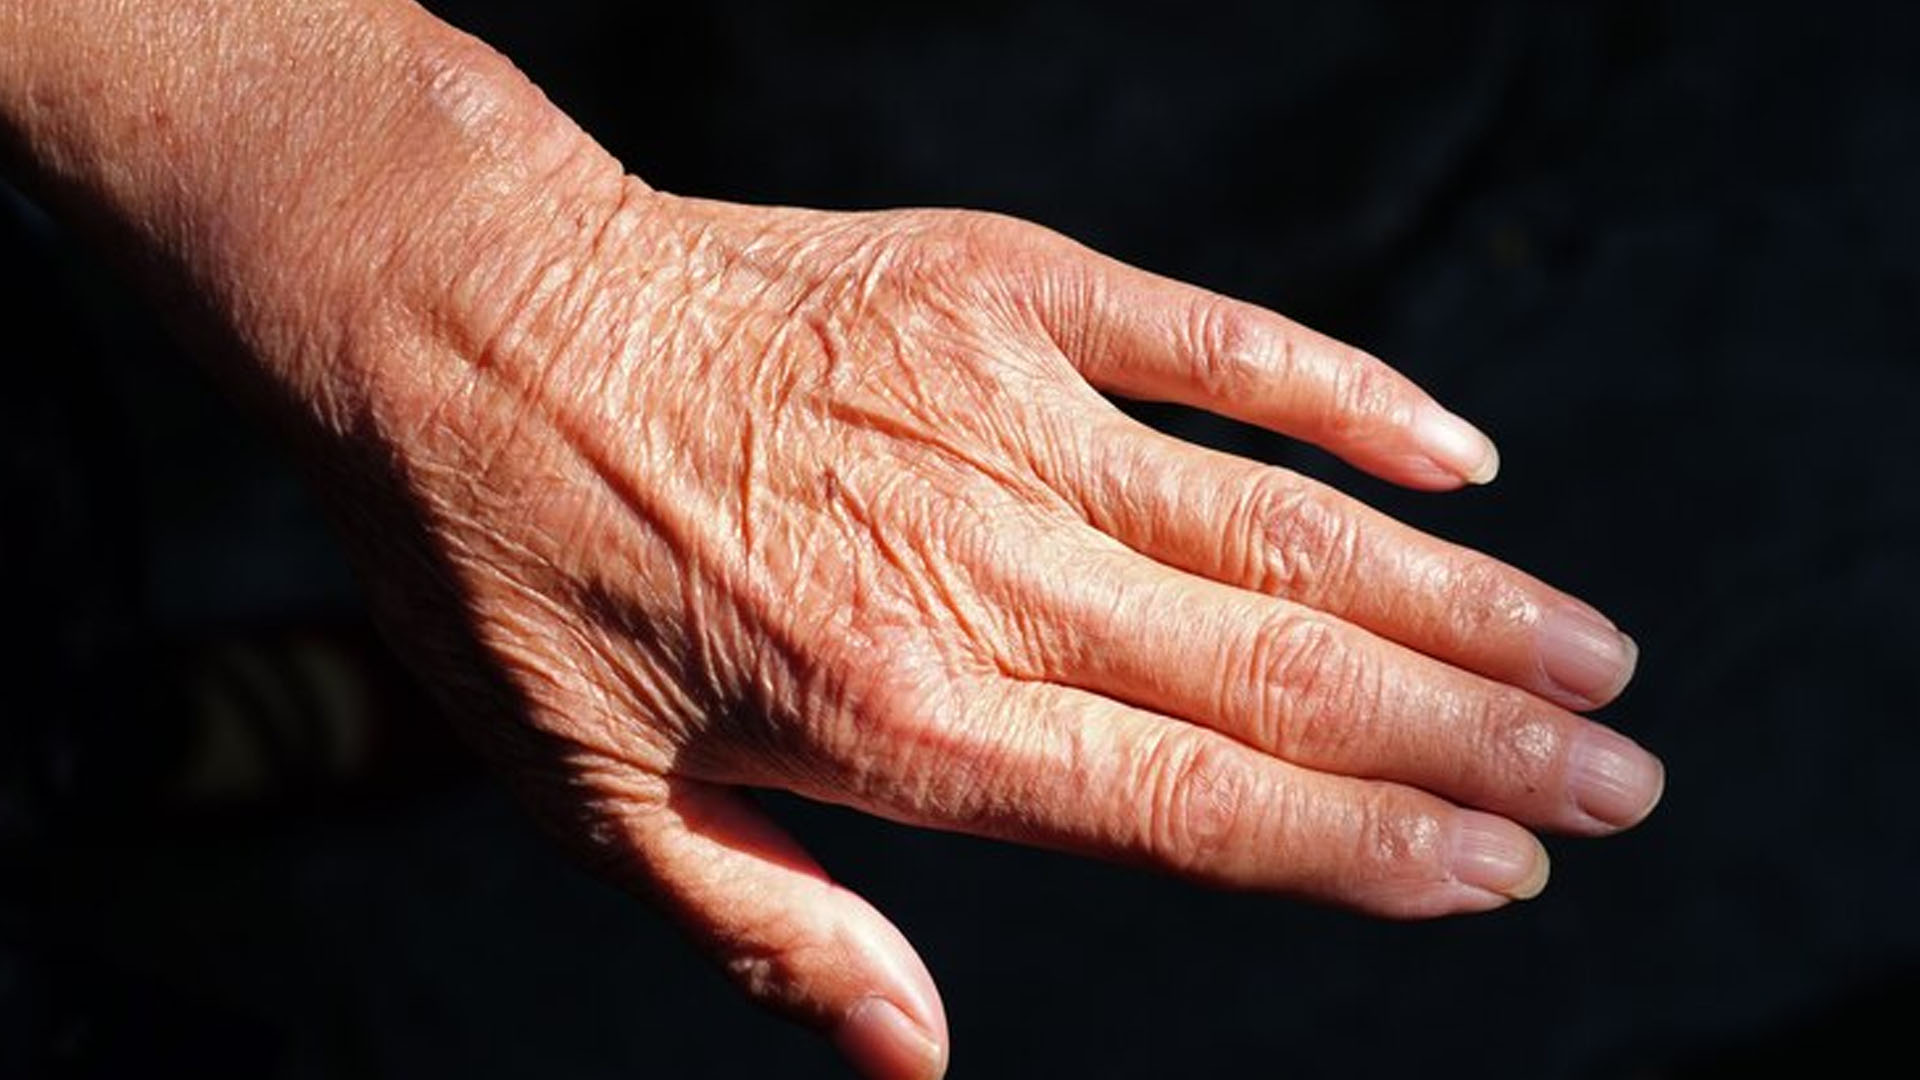 What are the Home Remedies for Wrinkled Hands?